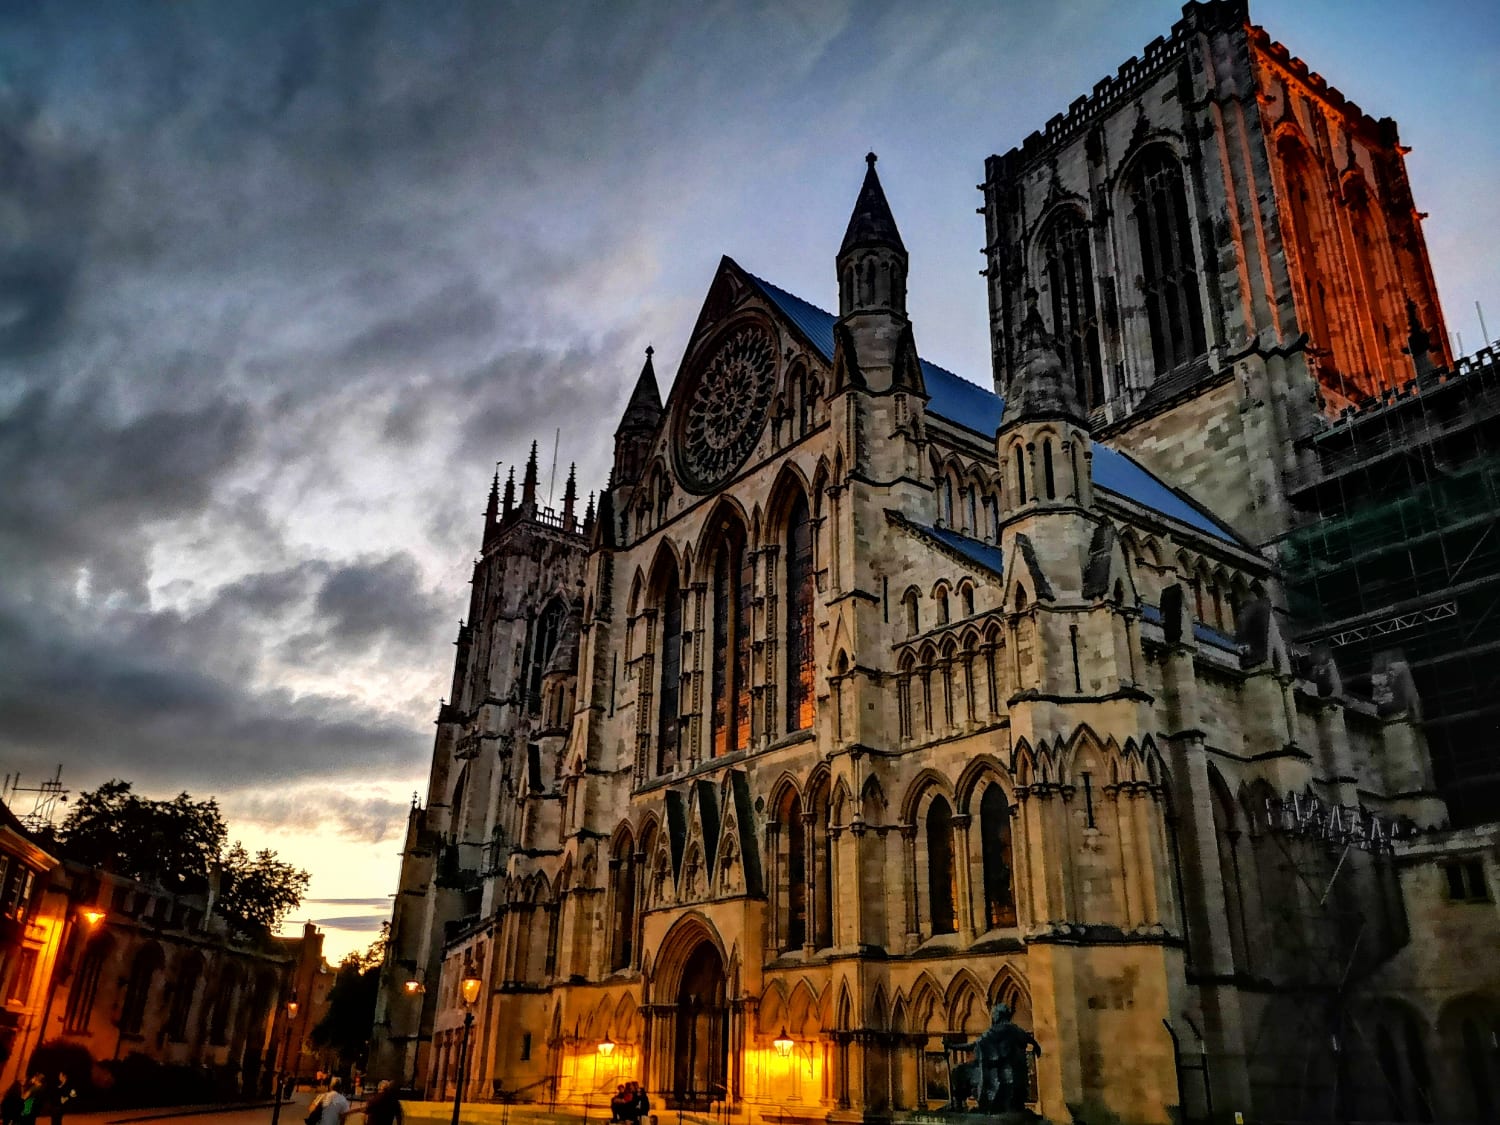 York Minster - York, UK. A beautiful city which is well worth a visit.